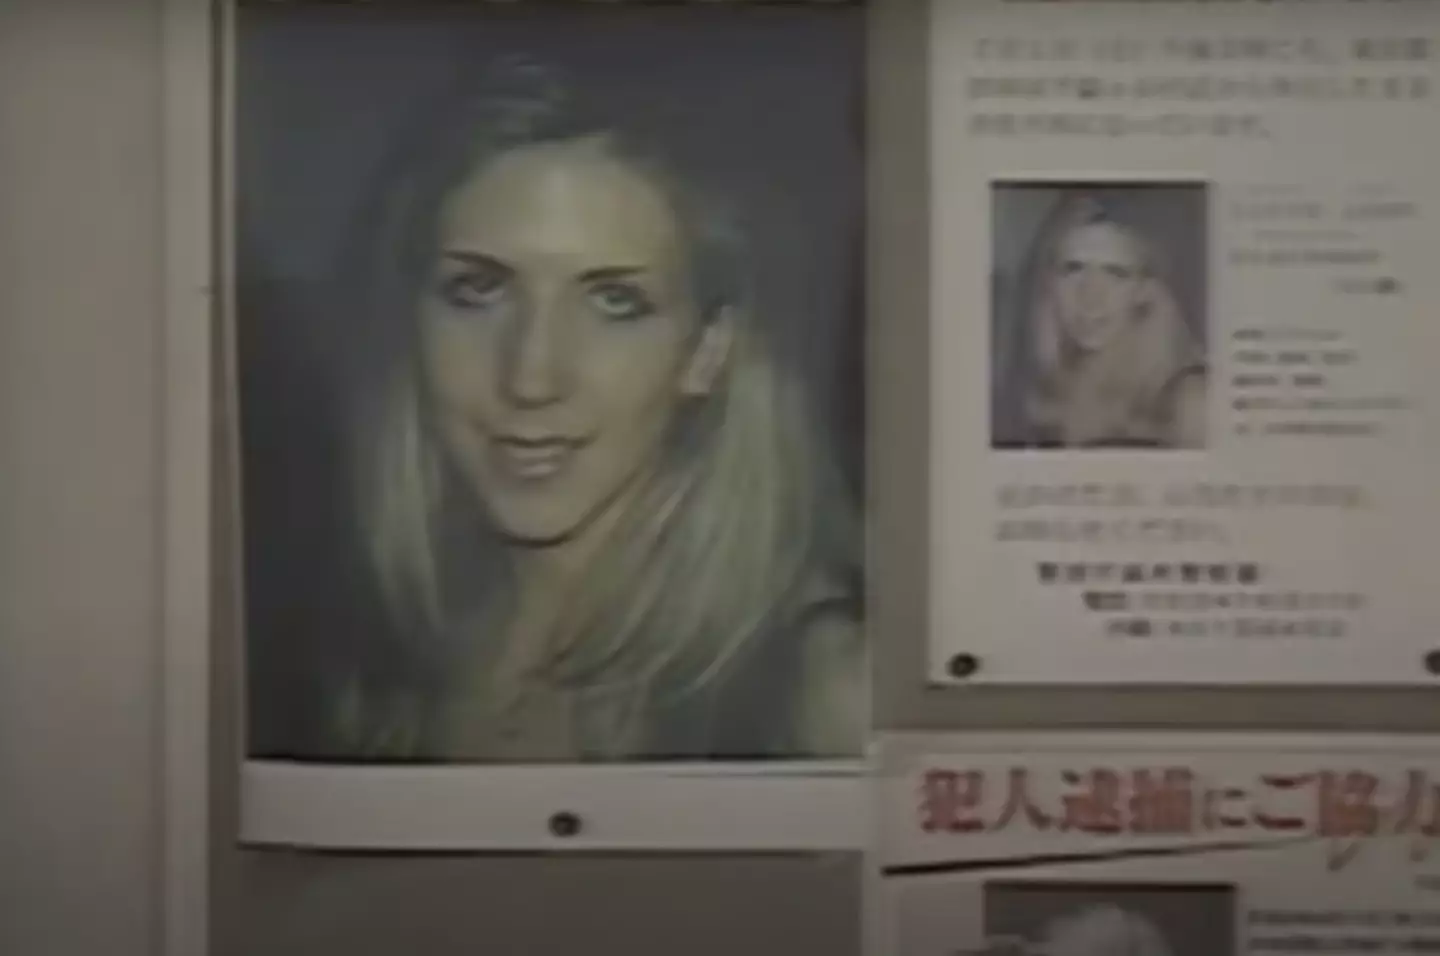 Missing: The Lucie Blackman Case is streaming on Netflix now.